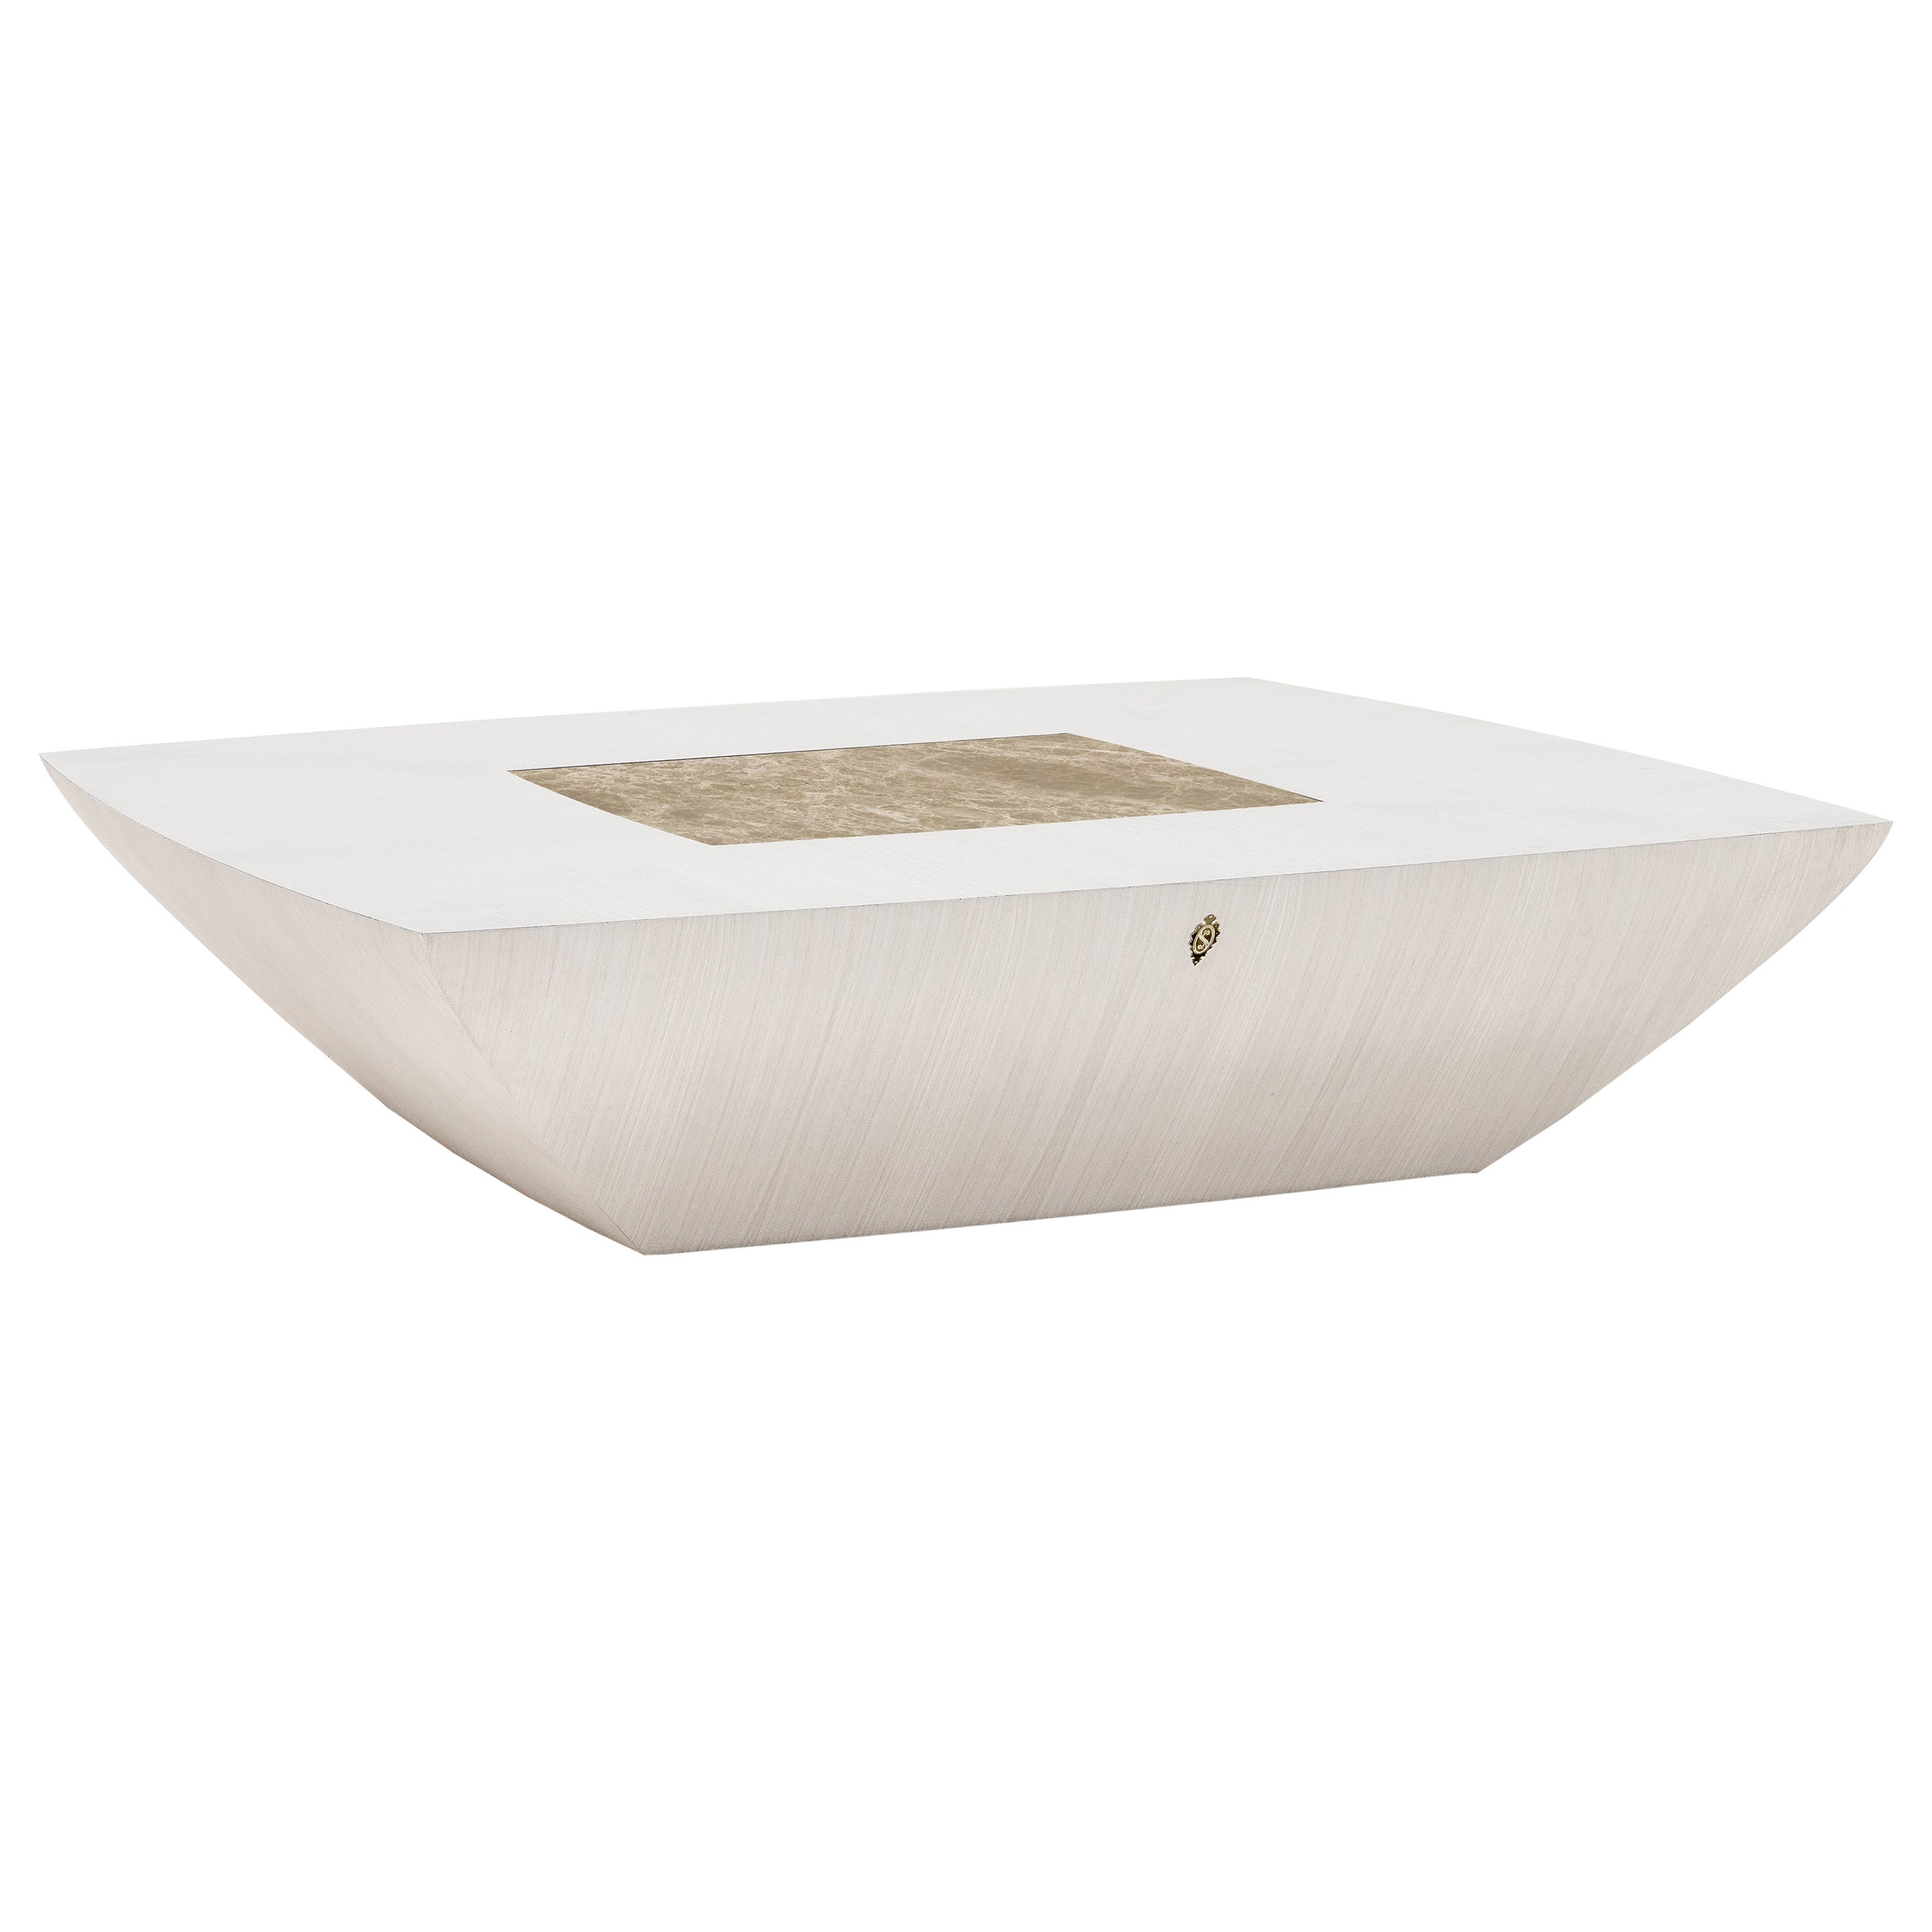 Modern Square Coffee Table in Thay White Wood and Brass, Made in Italy For Sale